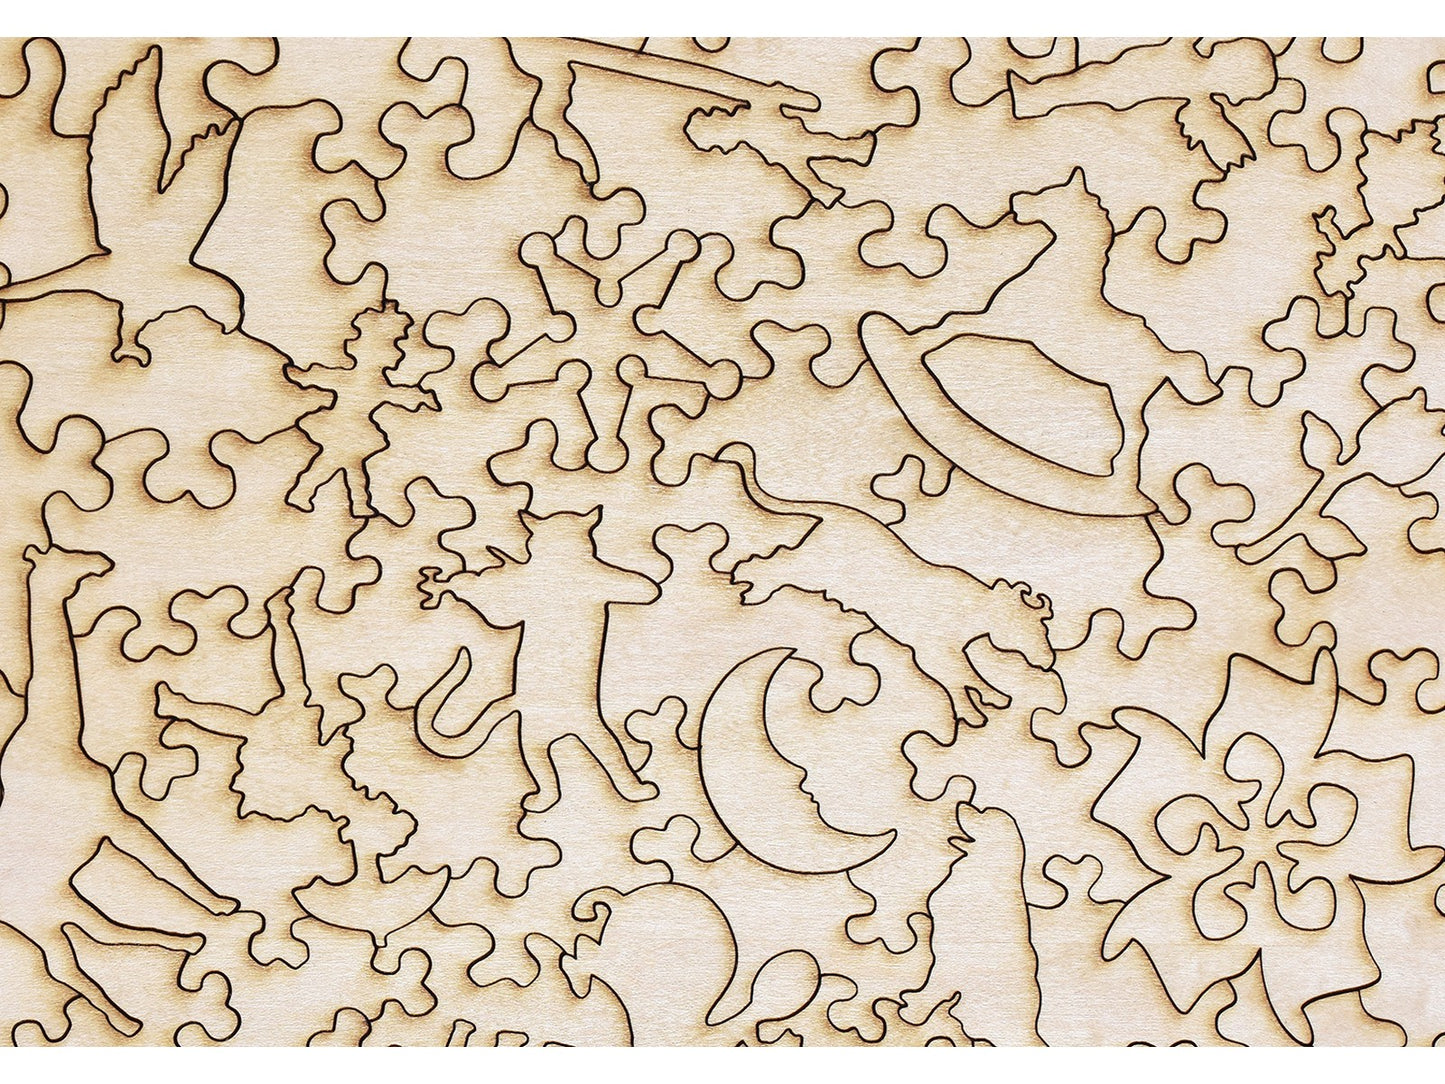 A closeup of the back of the puzzle, Dish Ran Away with the Spoon.